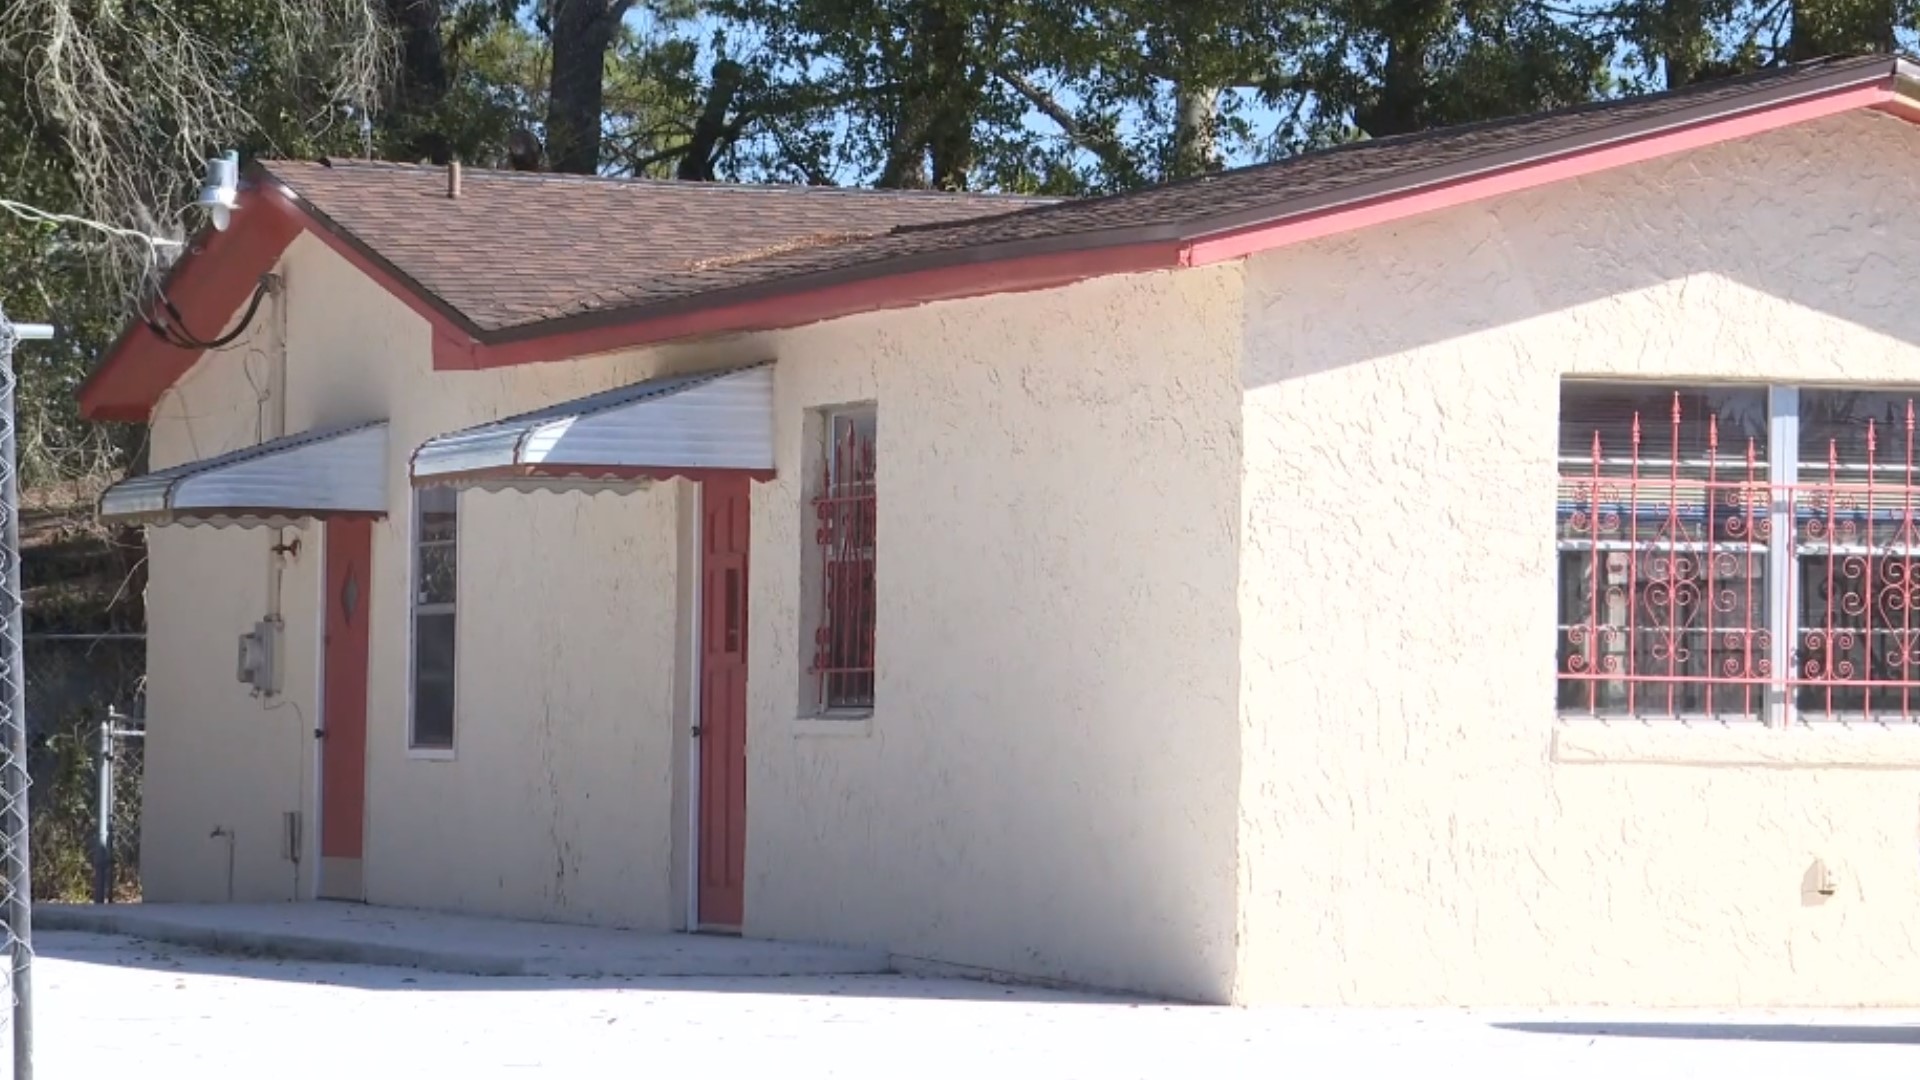 The property manager told First Coast News that a liquor license is too expensive, as he's open to meeting with councilmember Ju'Coby Pittman to find a solution.